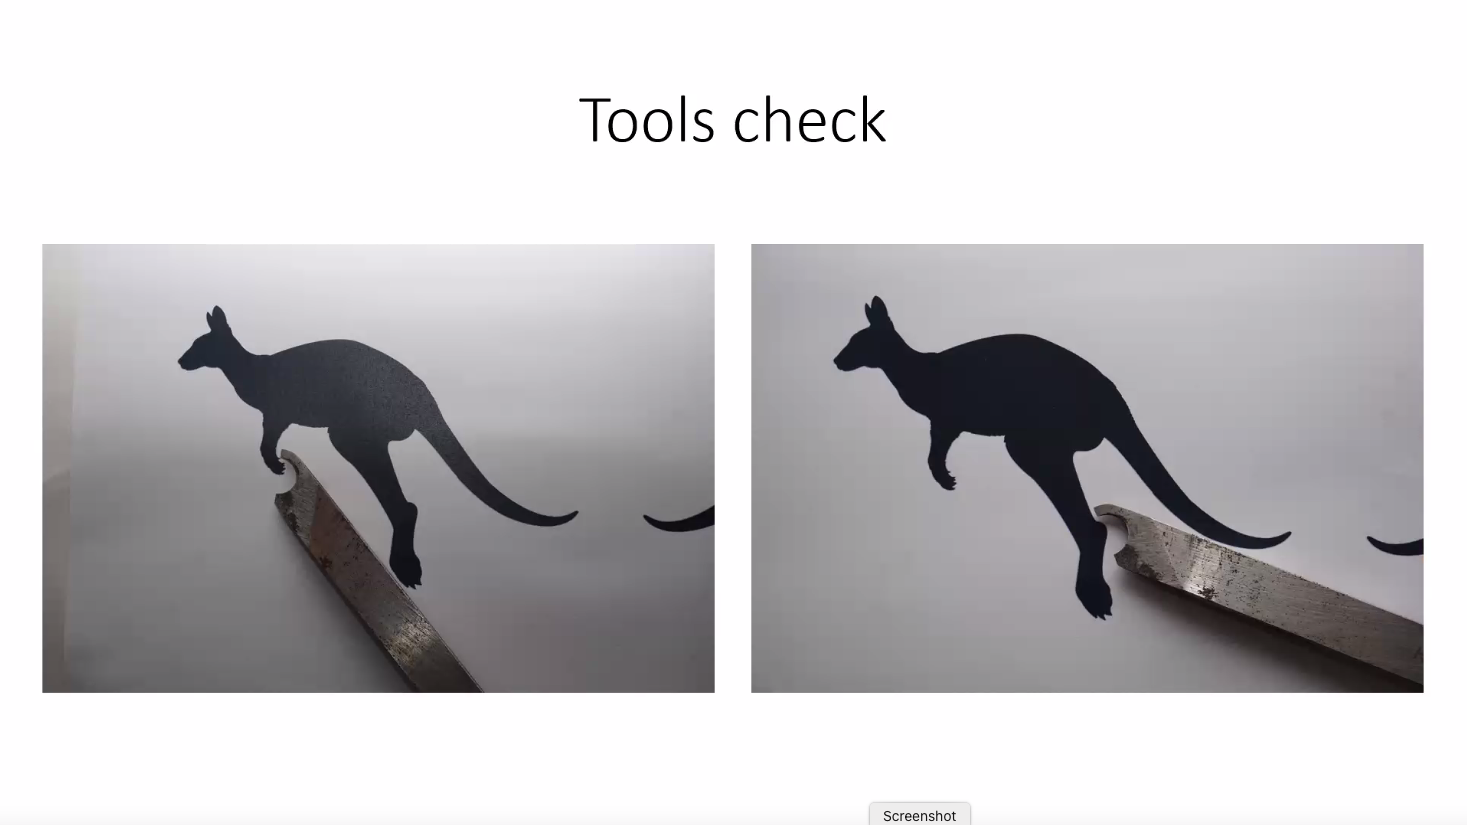  A tool check is vital to see if you can fit your tools into the contours of the silhouette. 